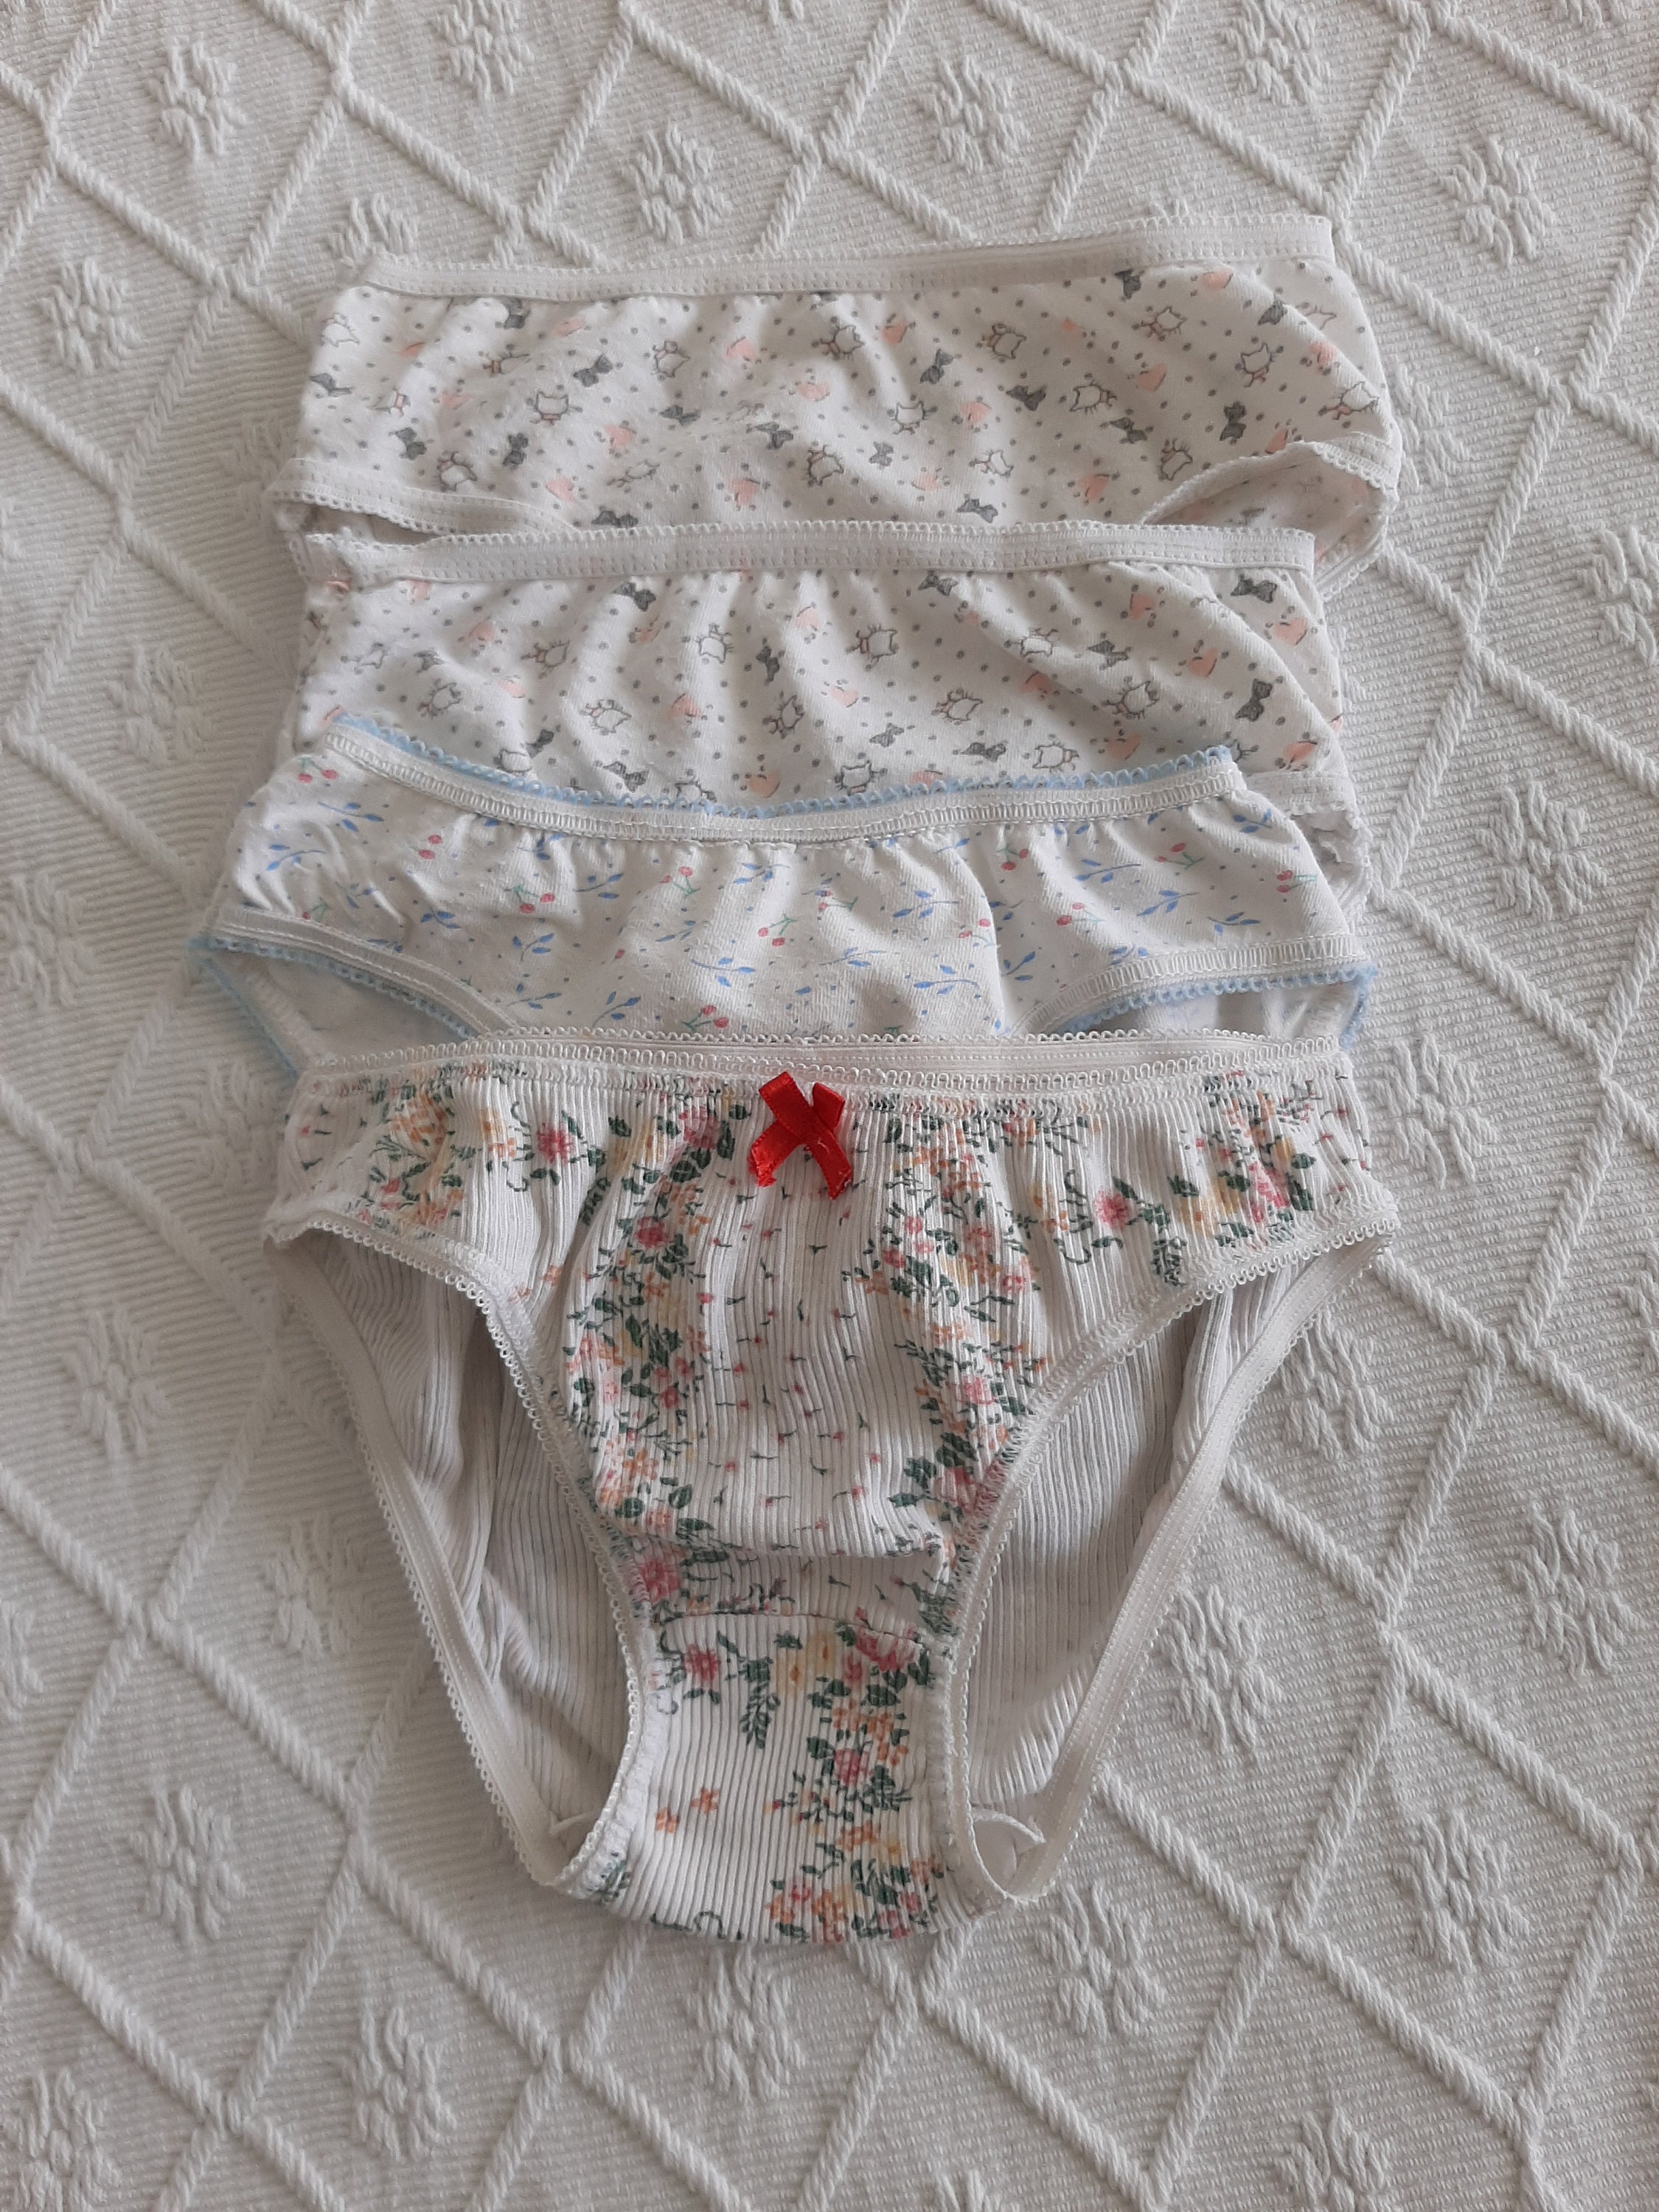 Lot of Girl's Cotton Panties 6/8 Years Old, Girl's Underwear, Girl's  Lingerie, Vintage From the 90s. -  Canada